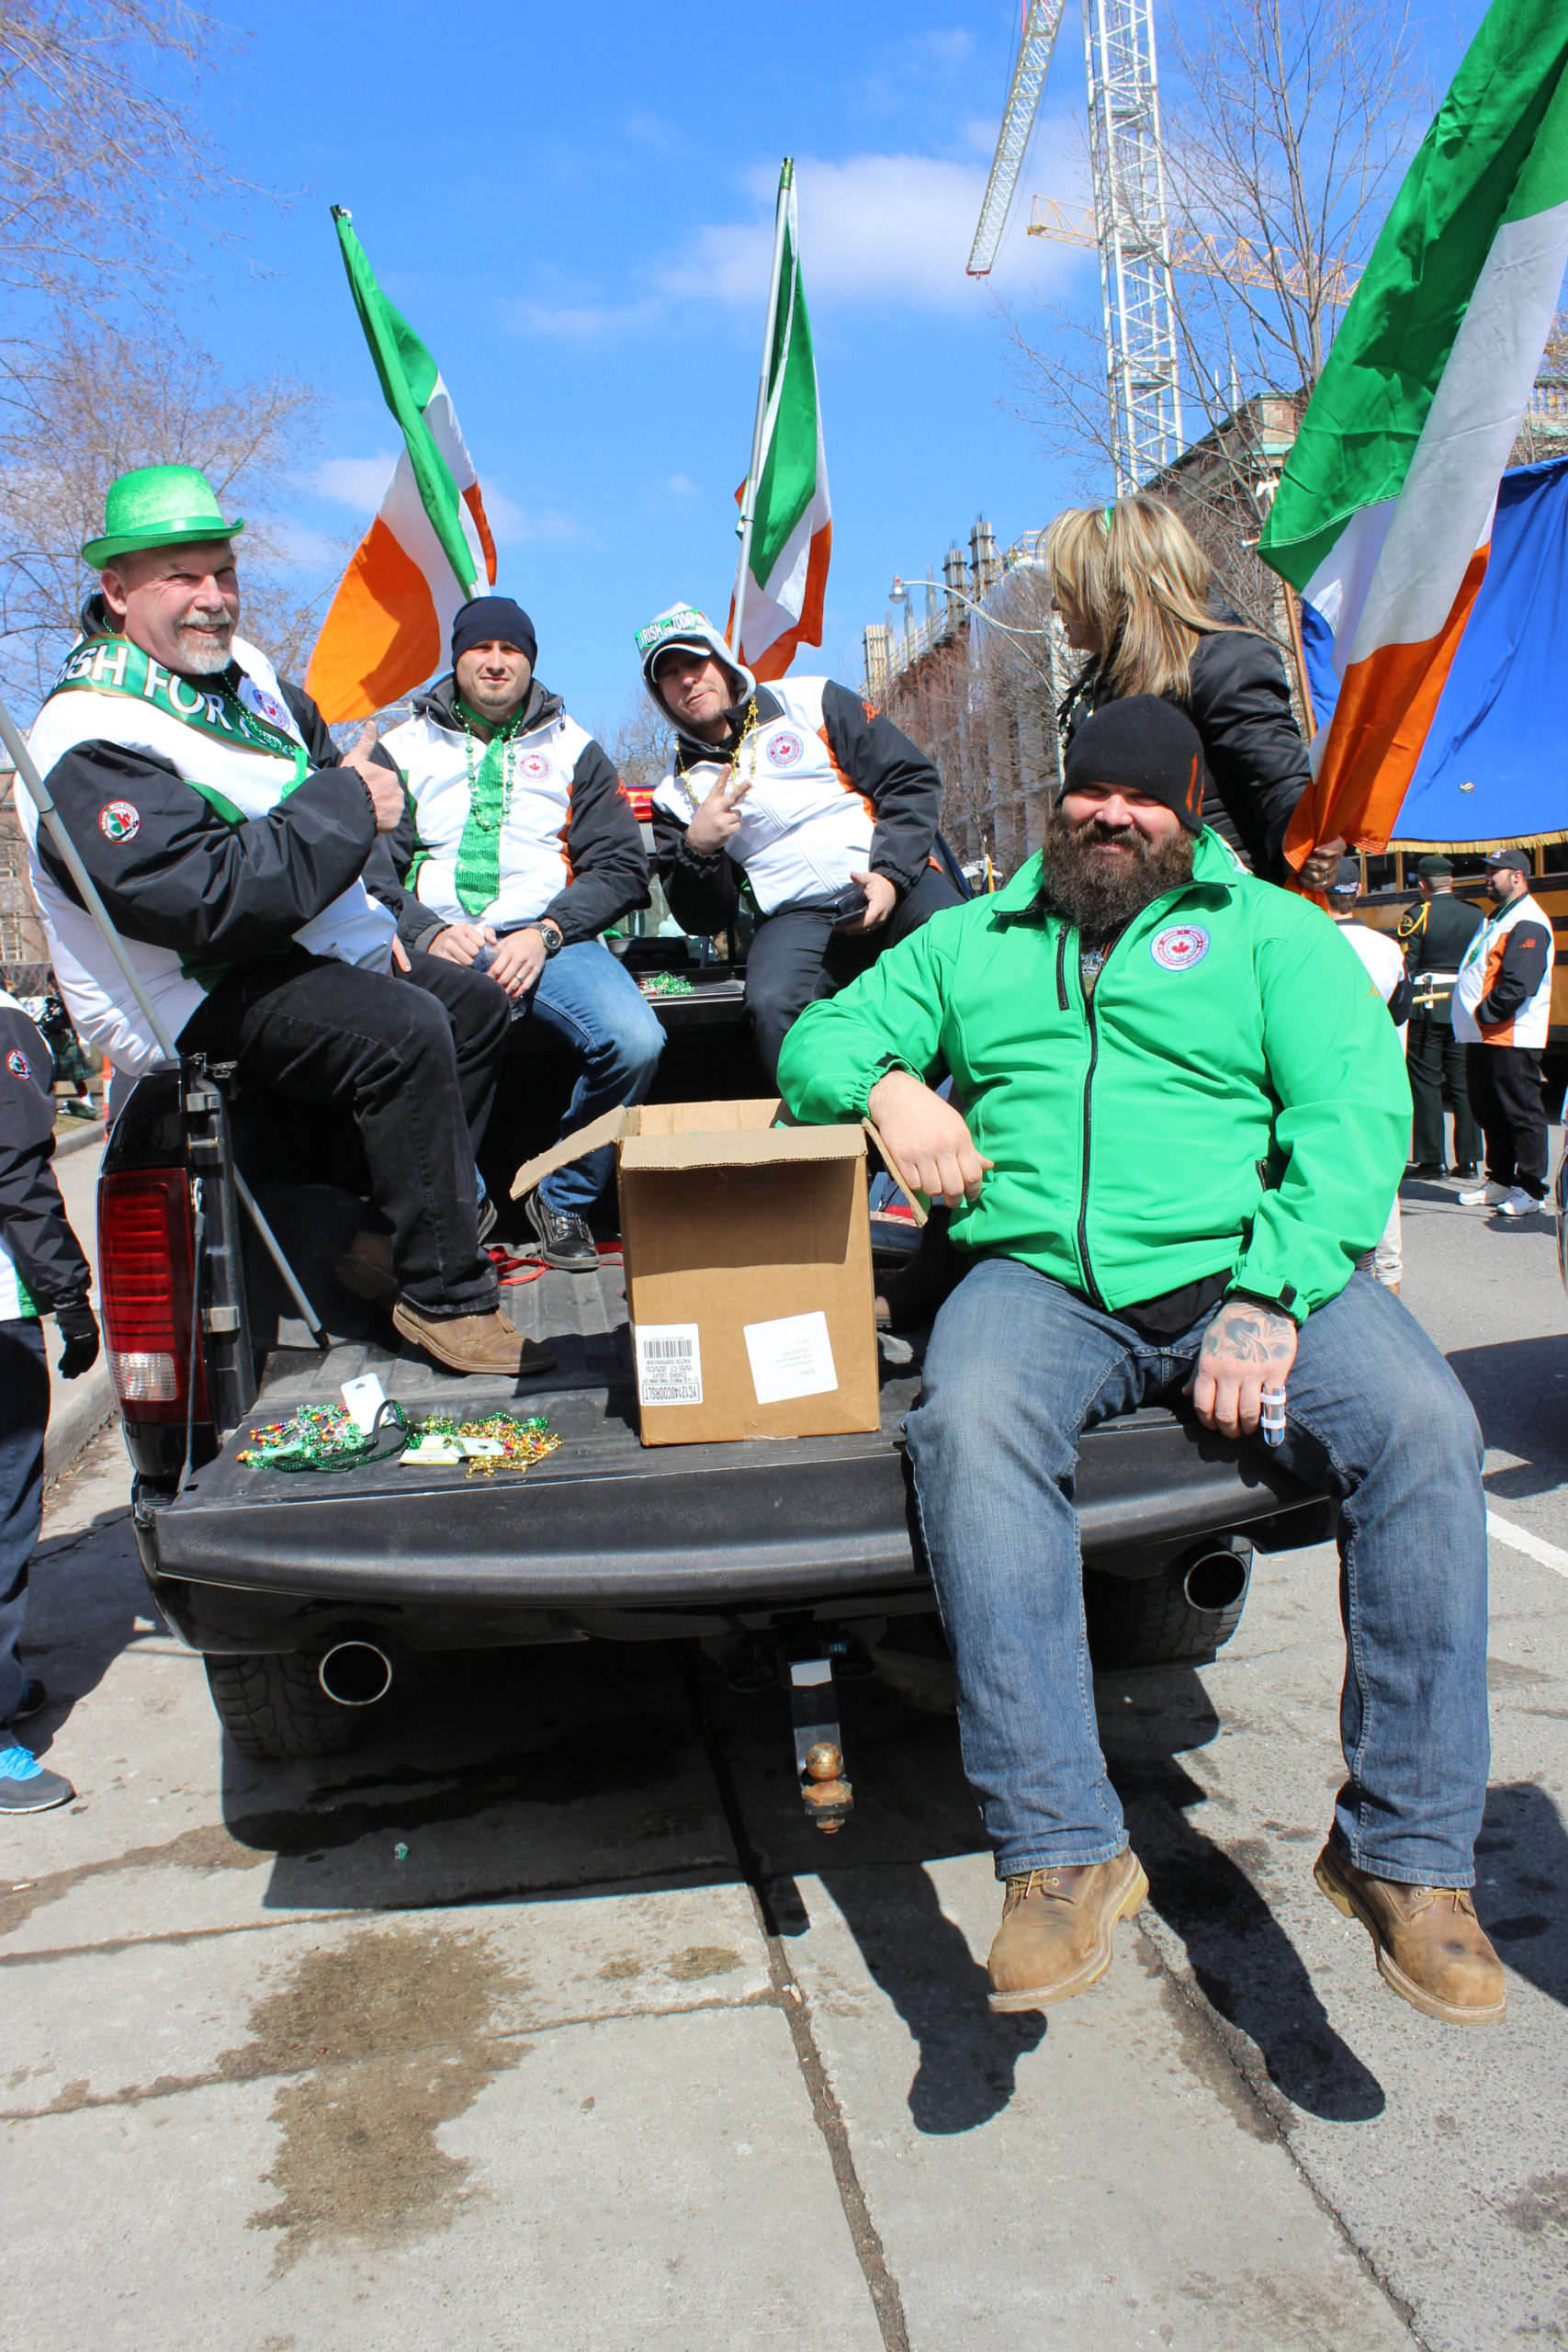 Local 793 member gets in the mood for St Patrick's Day.